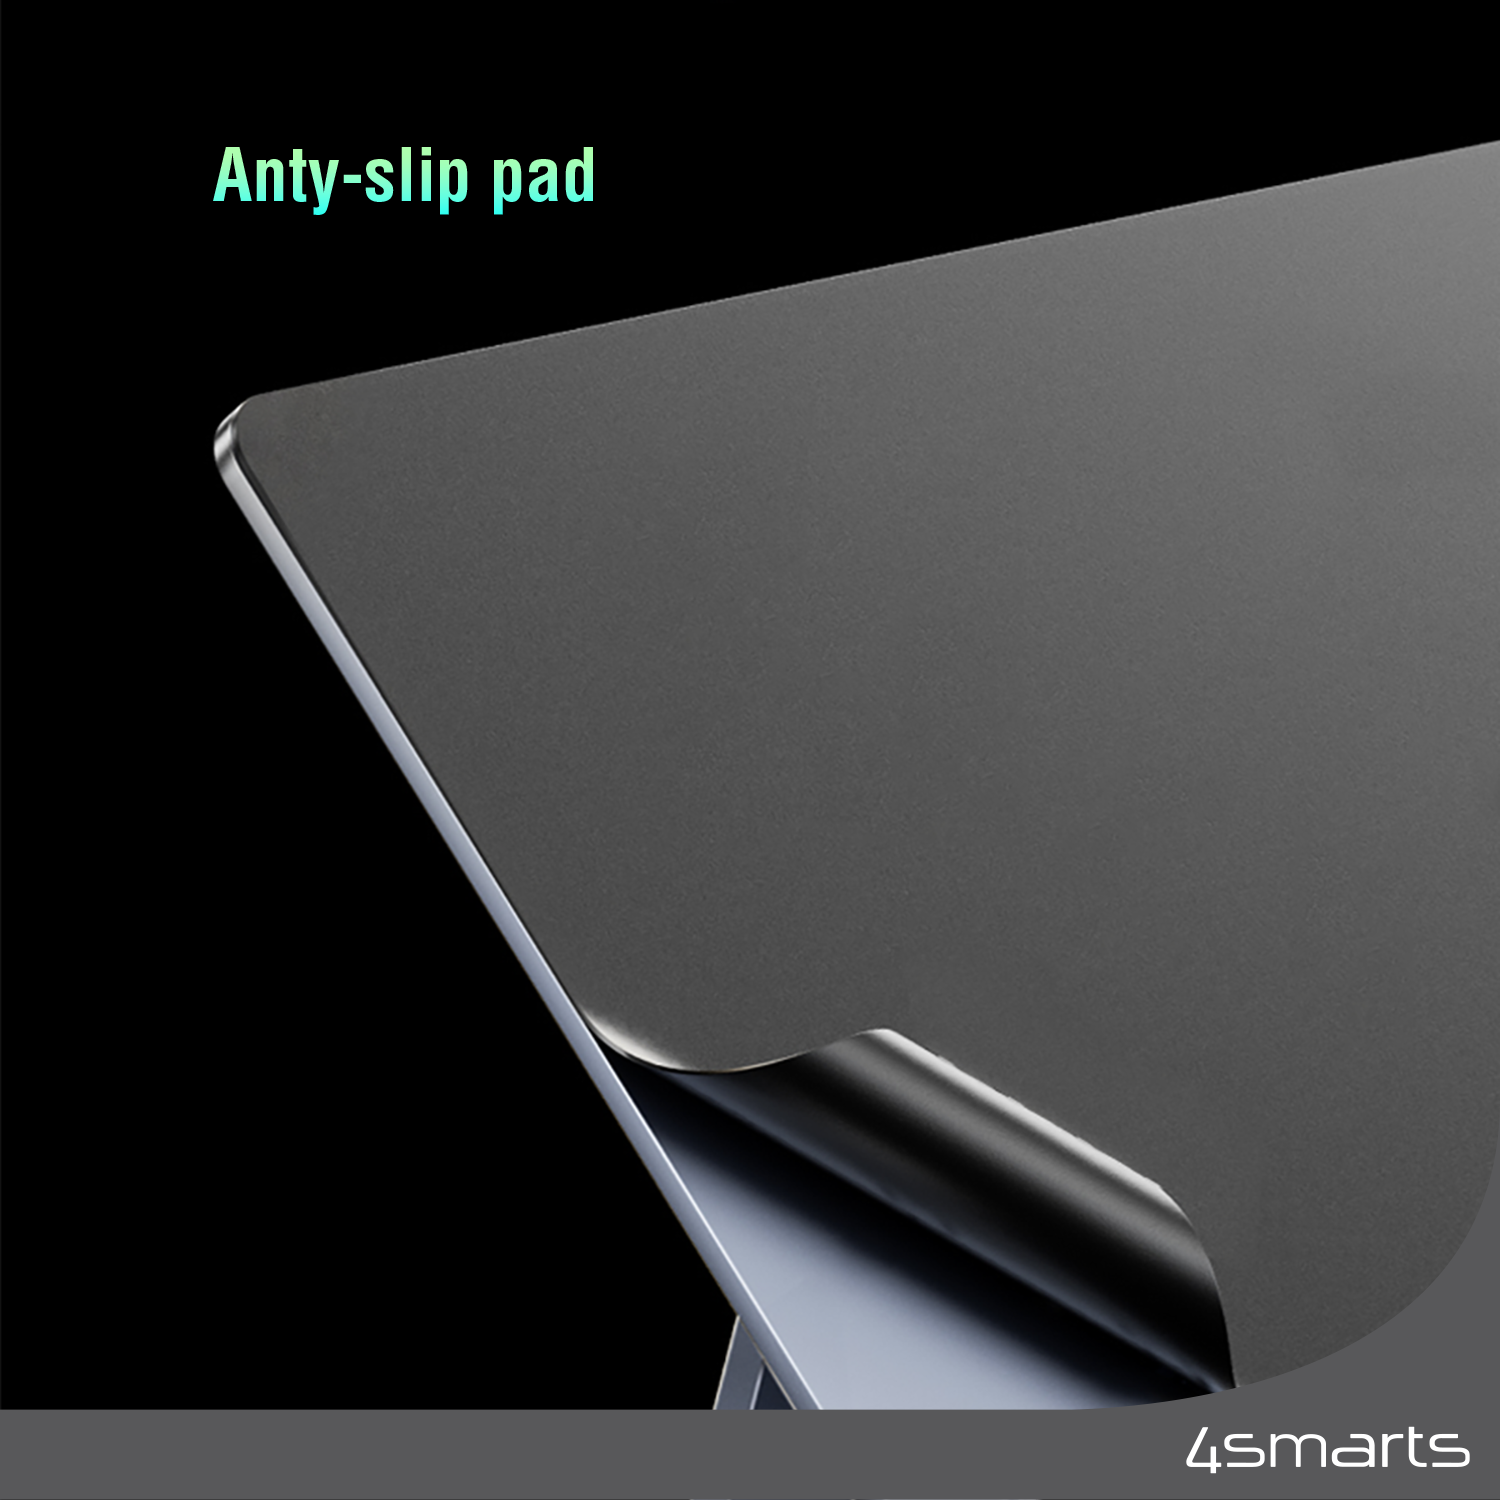 The anti-slip coating of your 4smarts tablet stand ensures that your Apple iPad Pro 11 is held securely and stably.